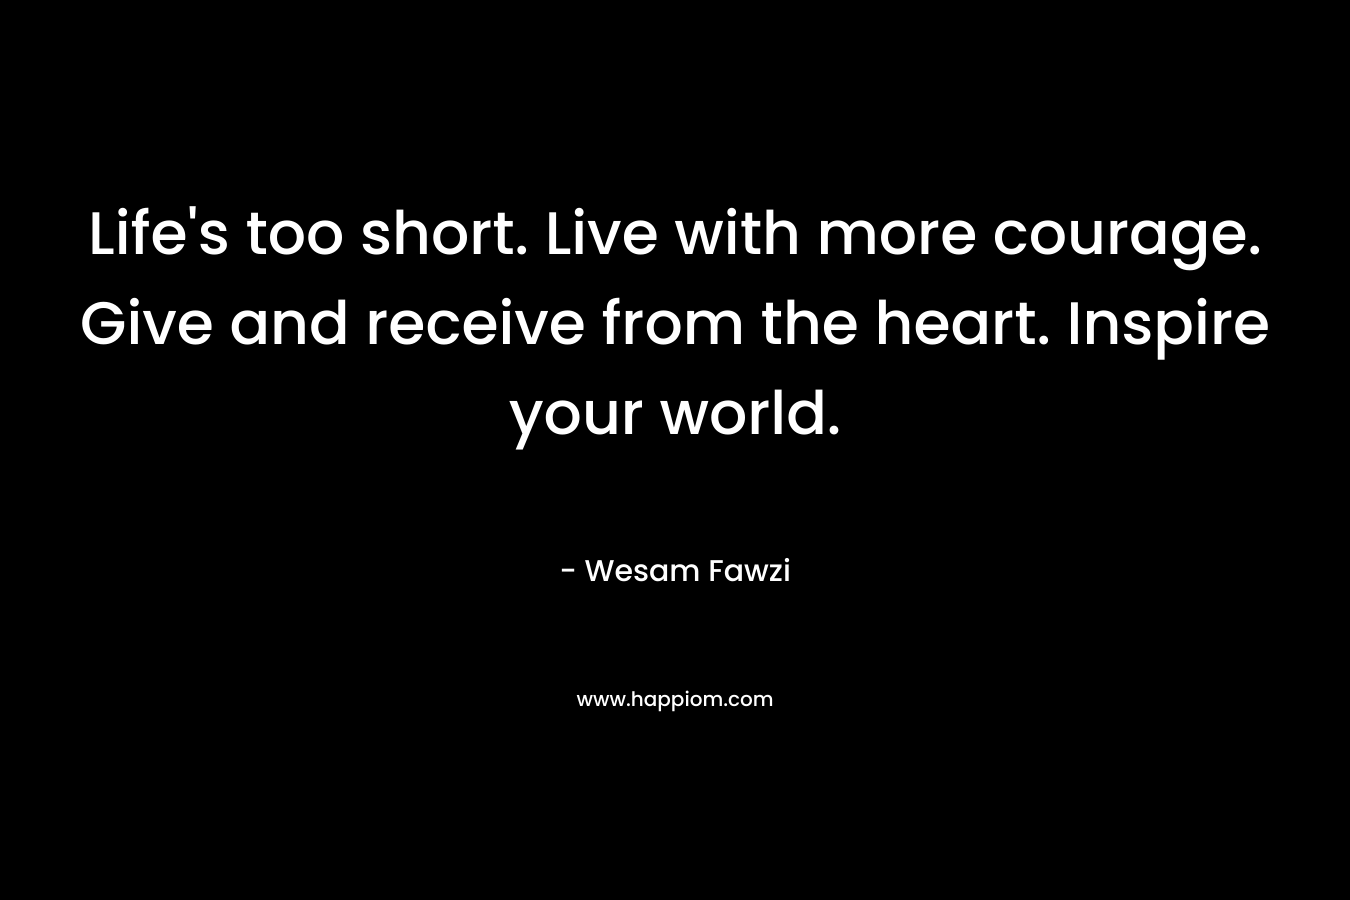 Life's too short. Live with more courage. Give and receive from the heart. Inspire your world.